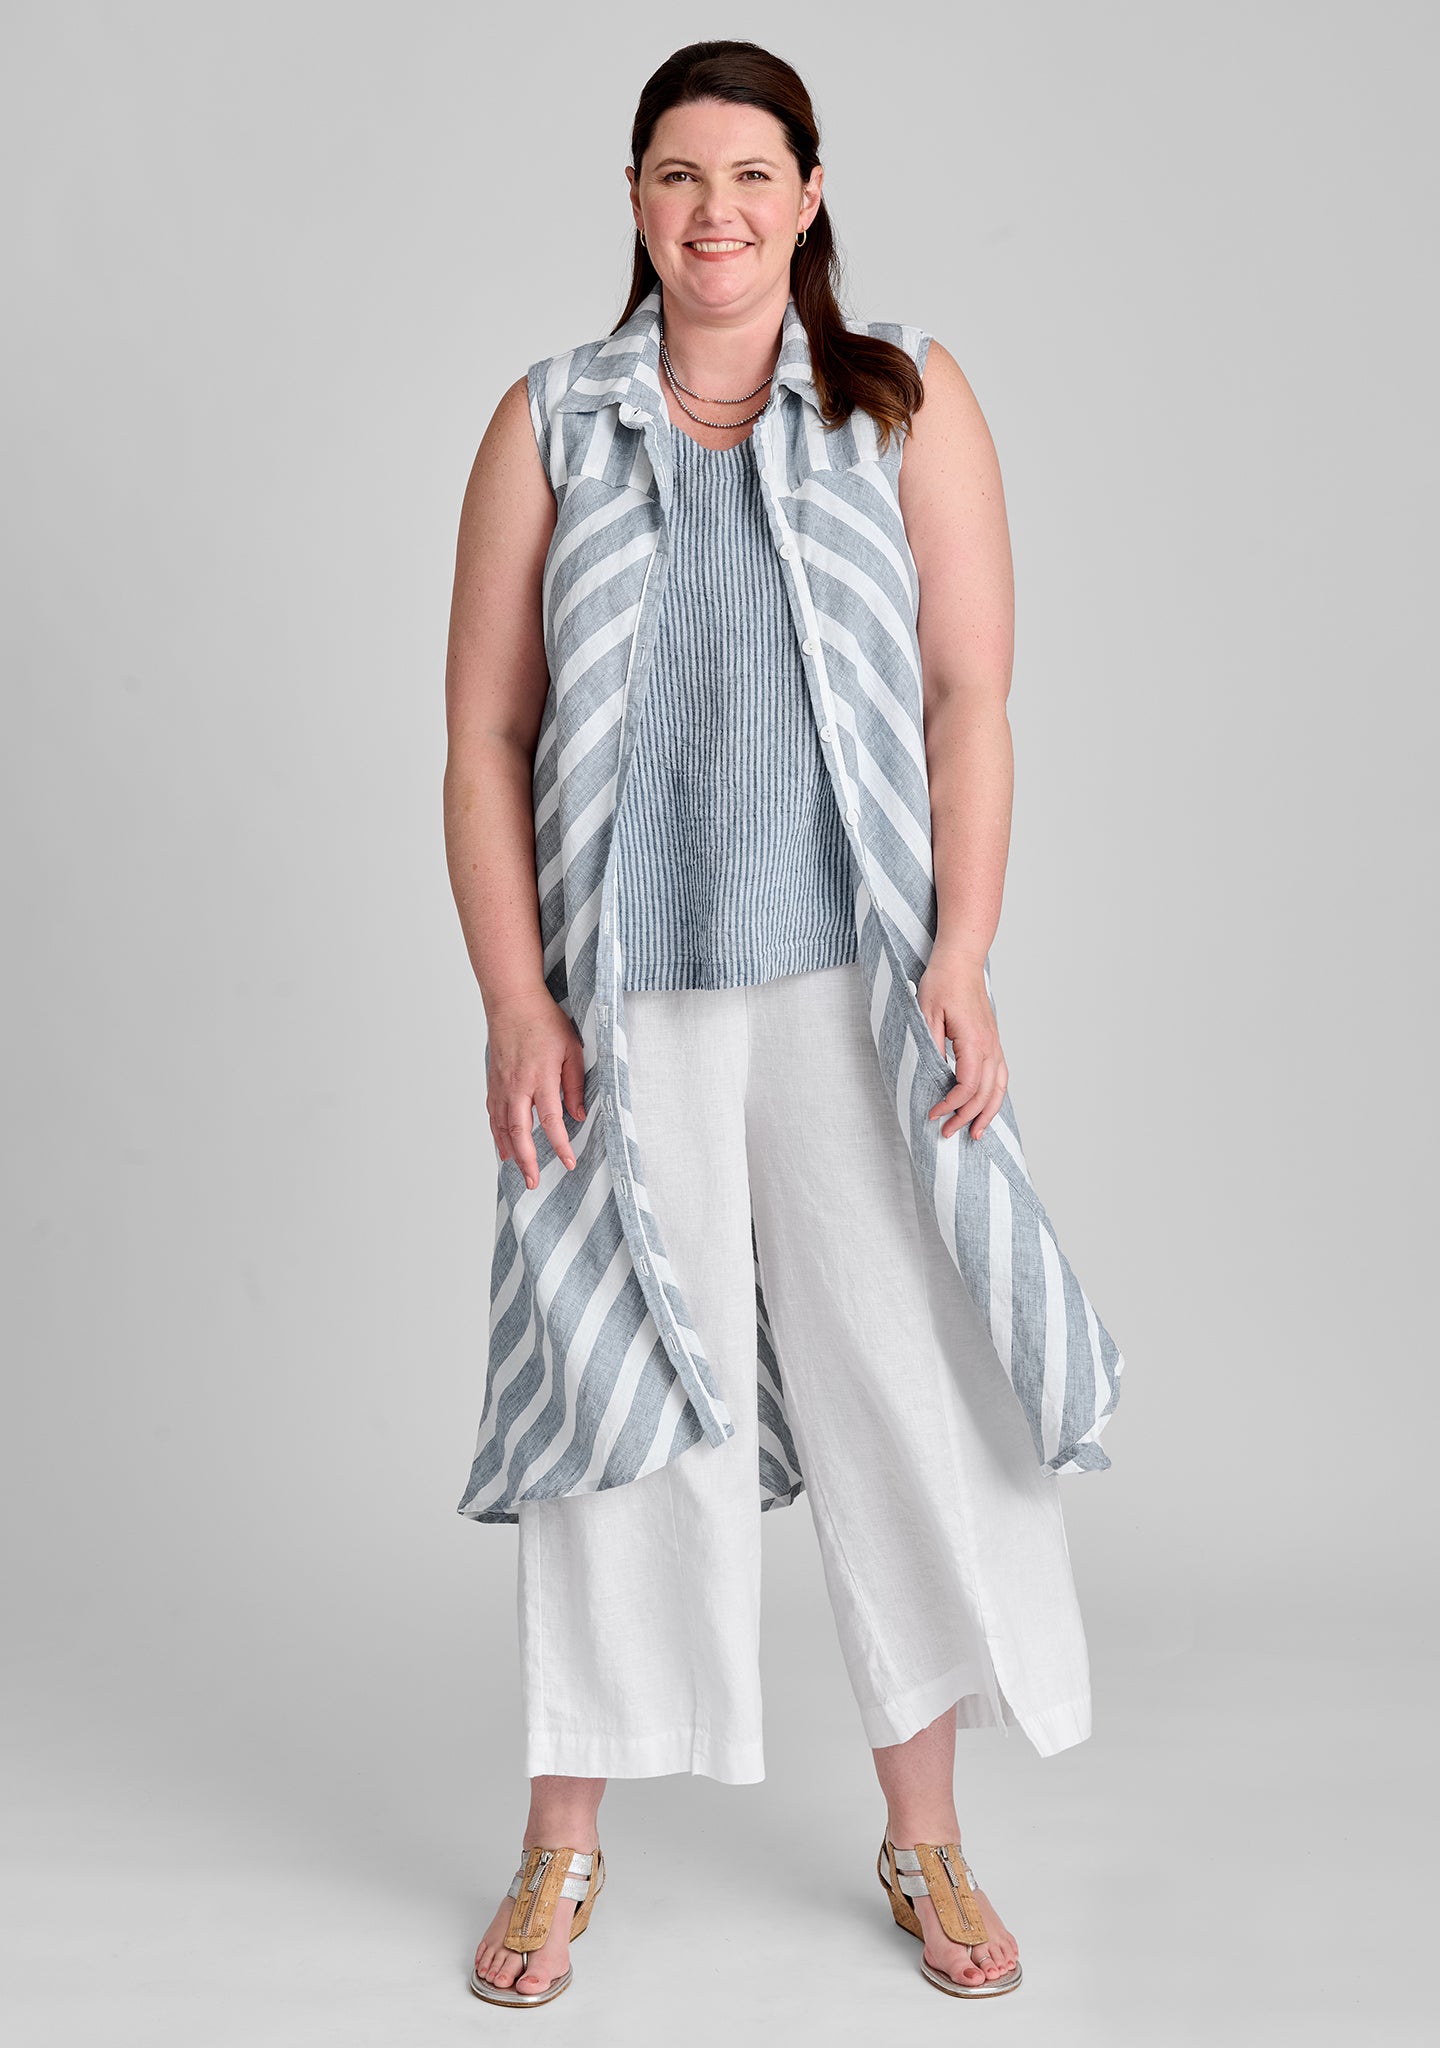 FLAX linen blouse in blue with linen tank in blue and linen pants in white